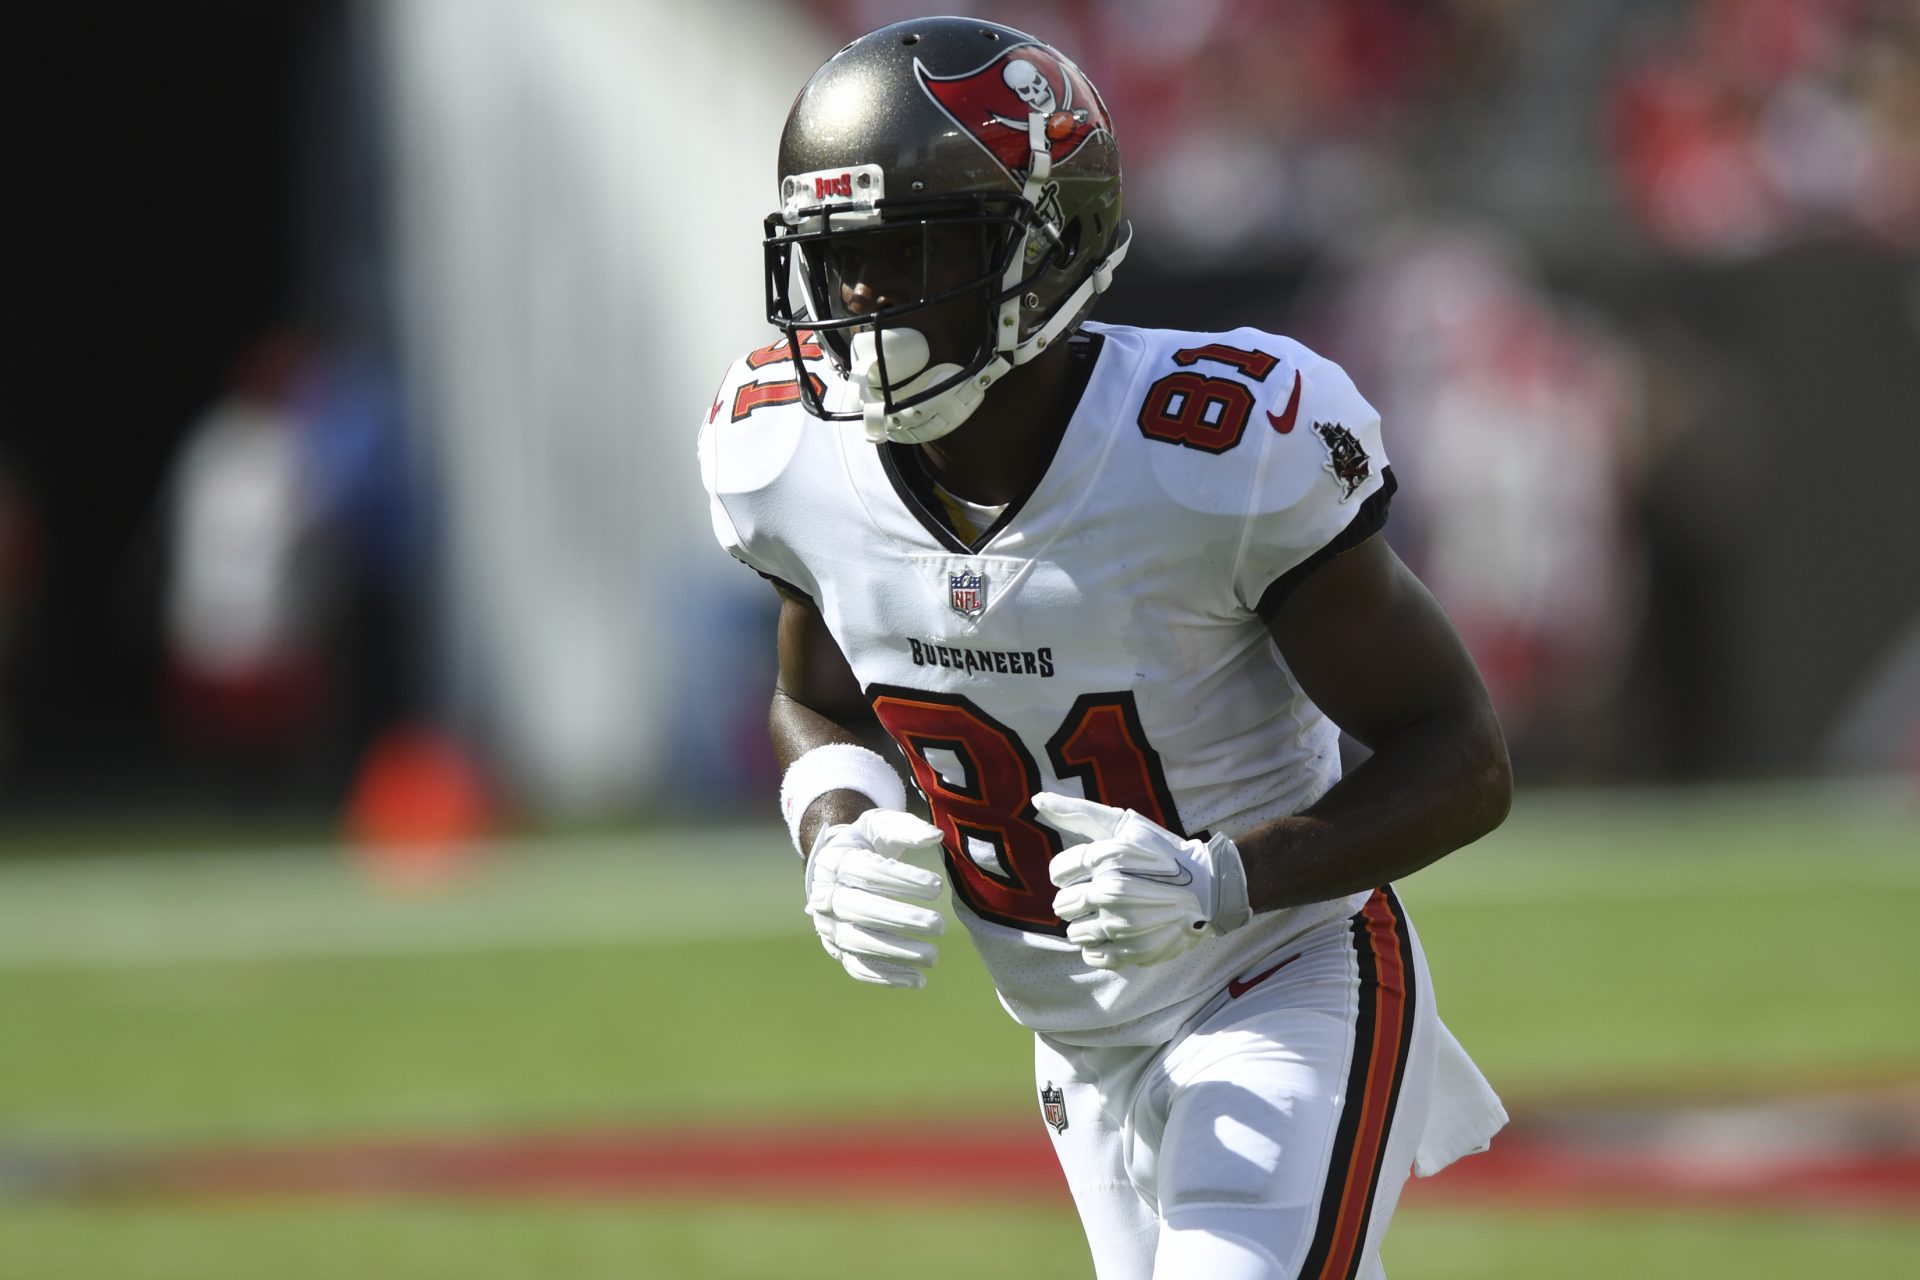 Bucs’ Antonio Brown Activated from Reserve/COVID-19 List Forward of Week 4 vs. Patriots